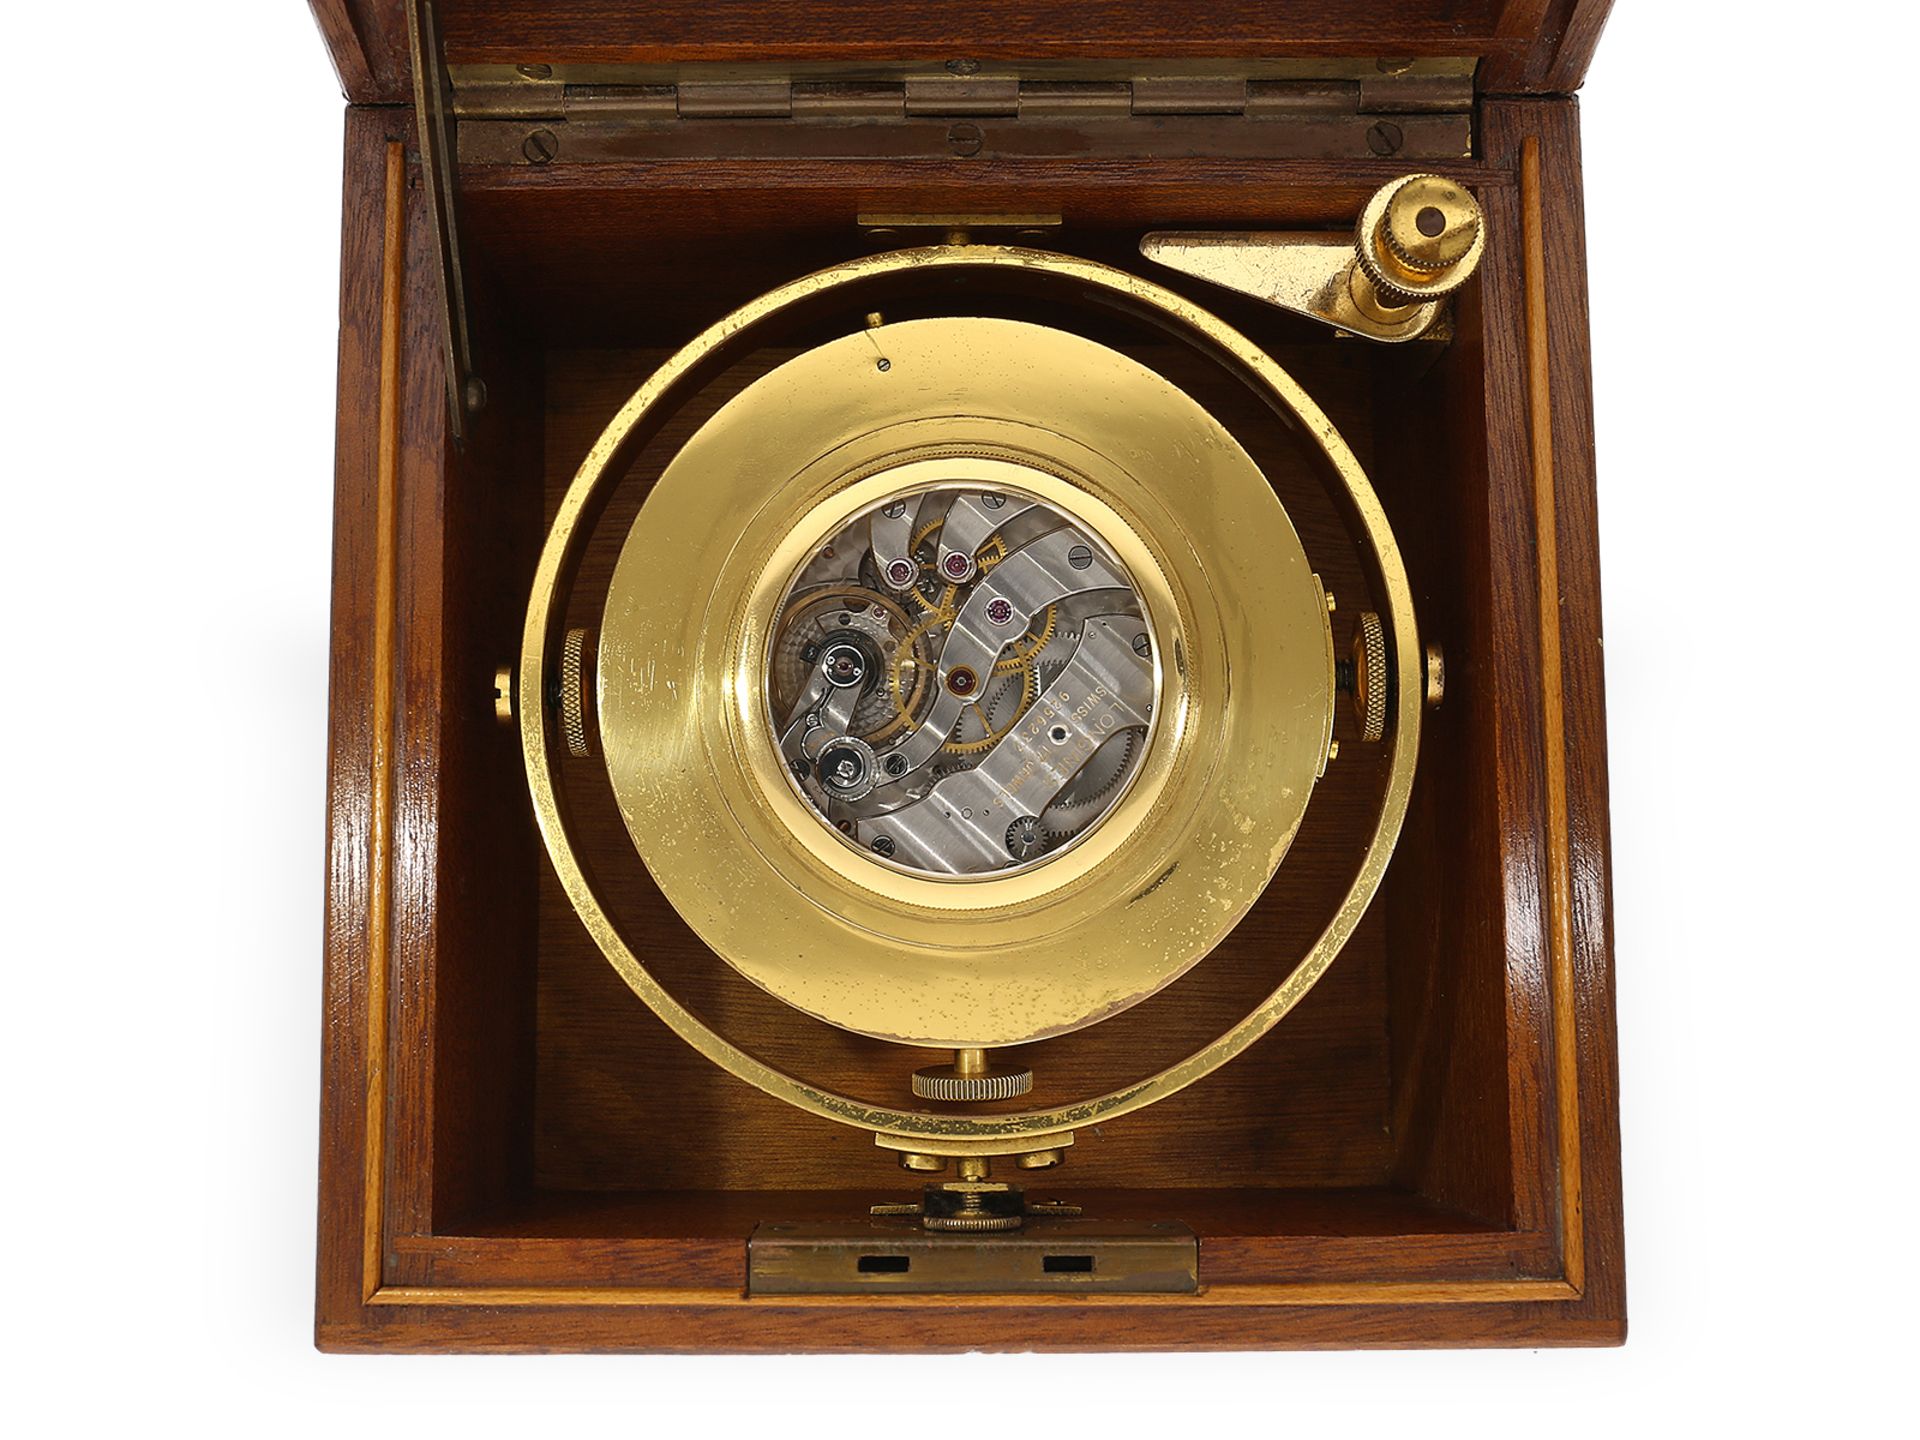 Very small, rare Longines marine chronometer in excellent condition, ca. 1950 - Image 2 of 6